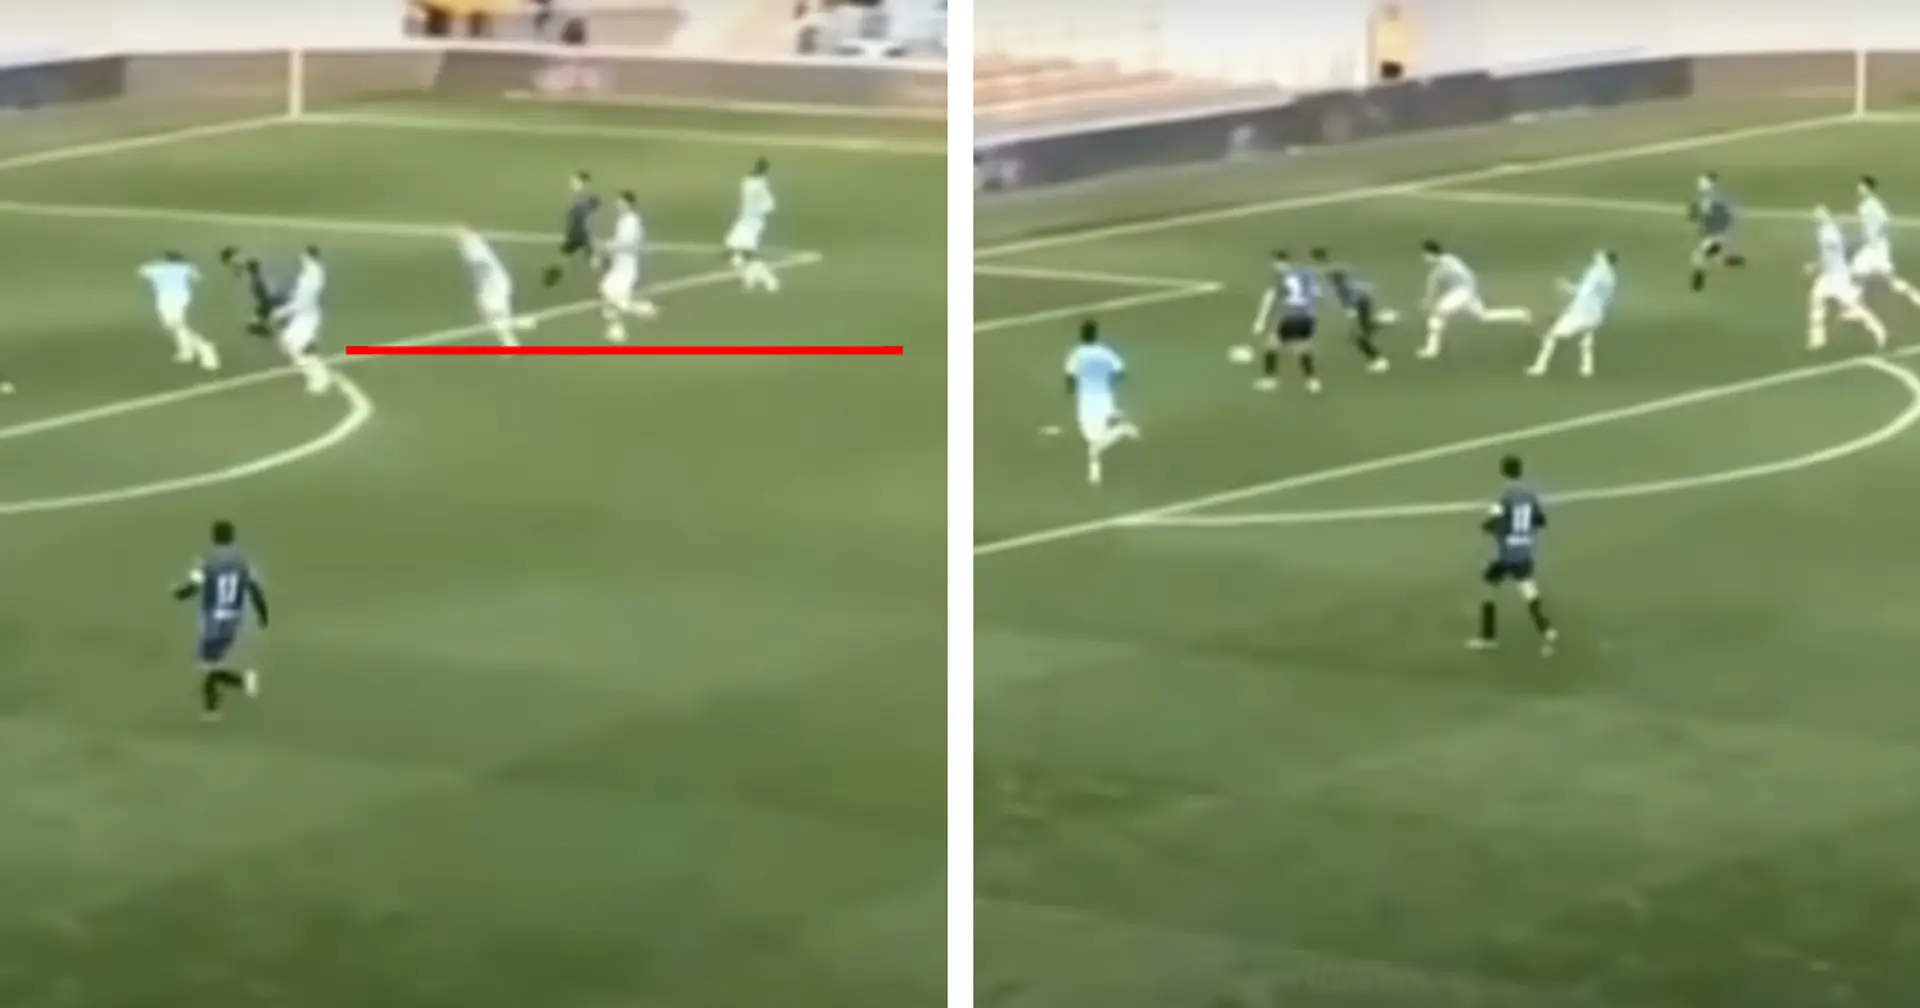 When Amad Diallo destroyed Man City defence - and how their coach reacted